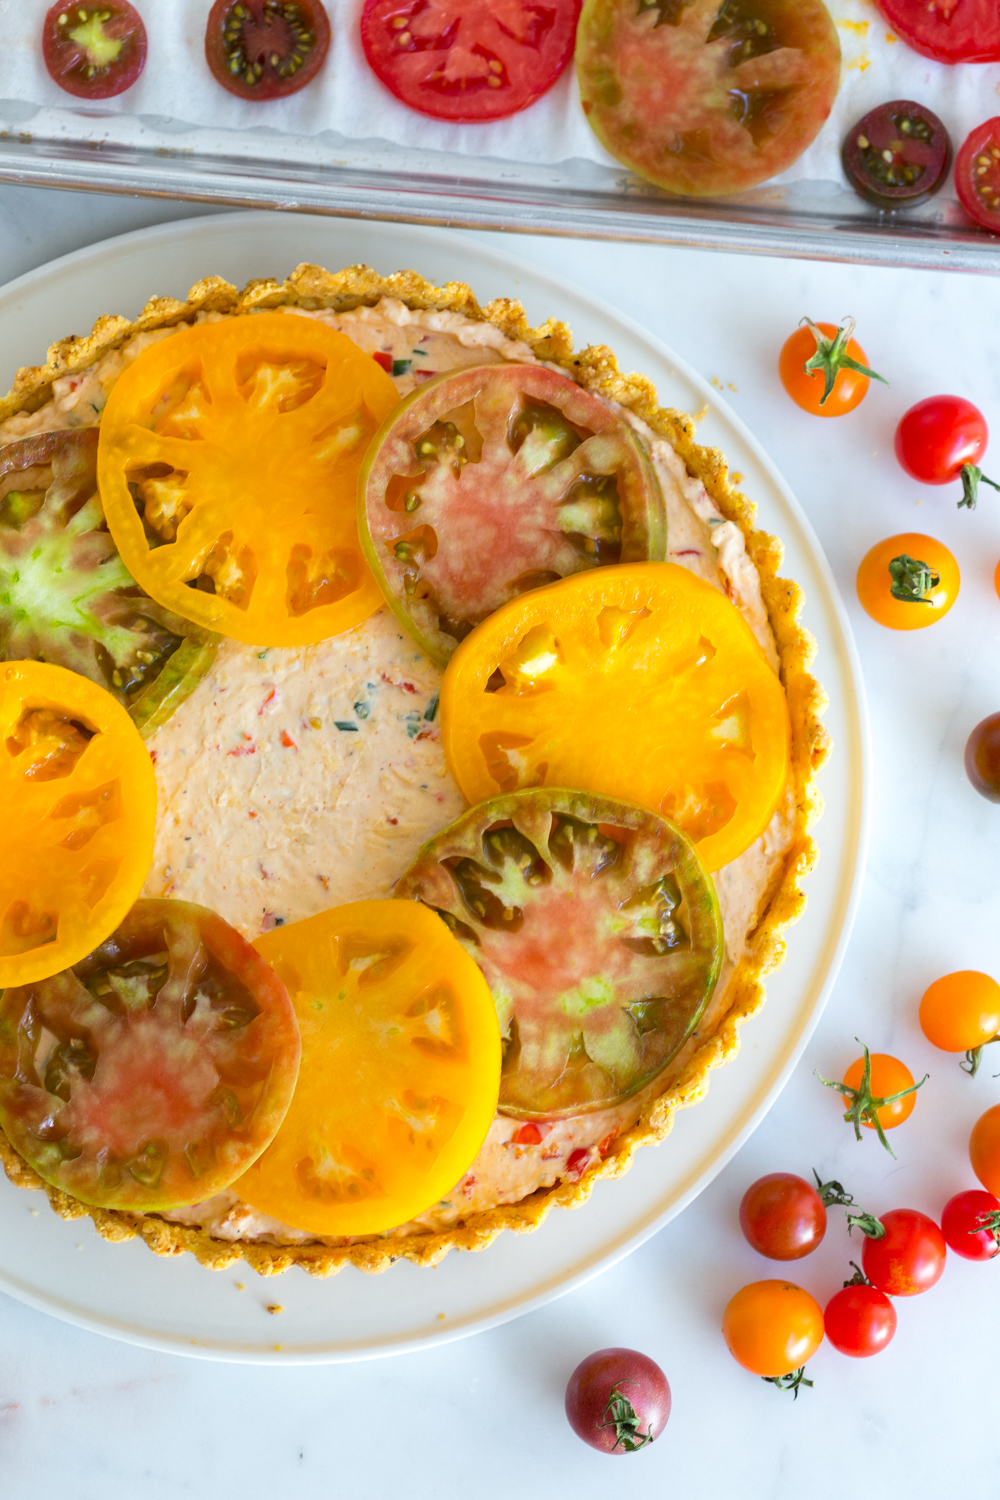 Layering the Heirloom Tomato and Pimento Cheese Tart with Cornmeal Crust